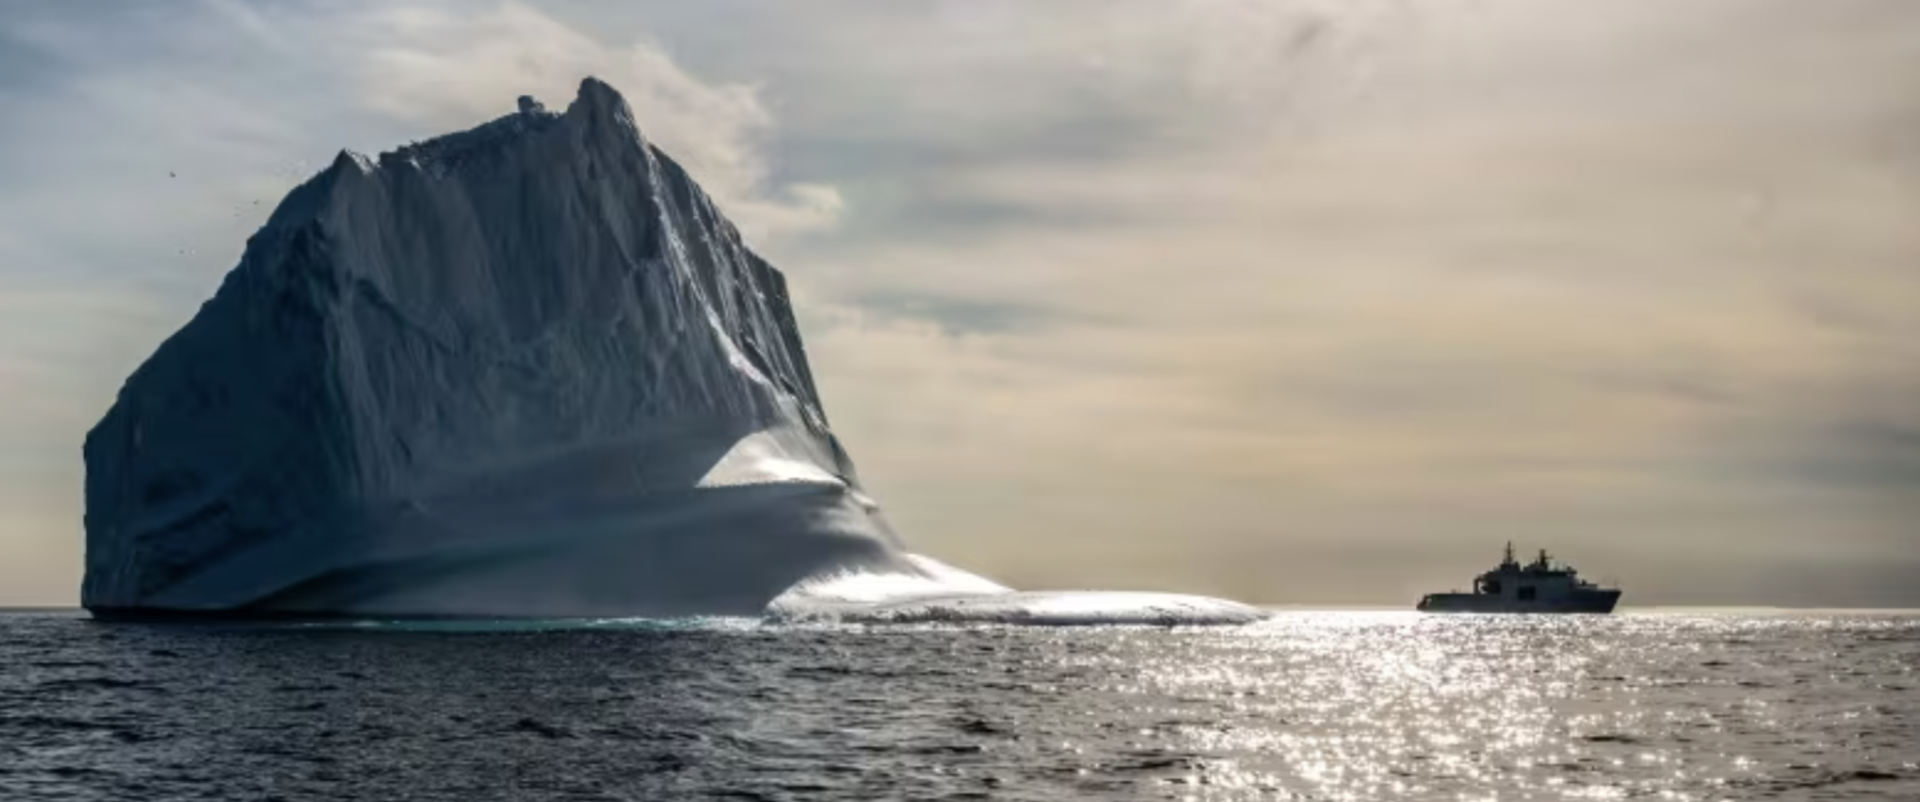 Canadian navy ship spots 25-storey iceberg en route to Arctic training operation